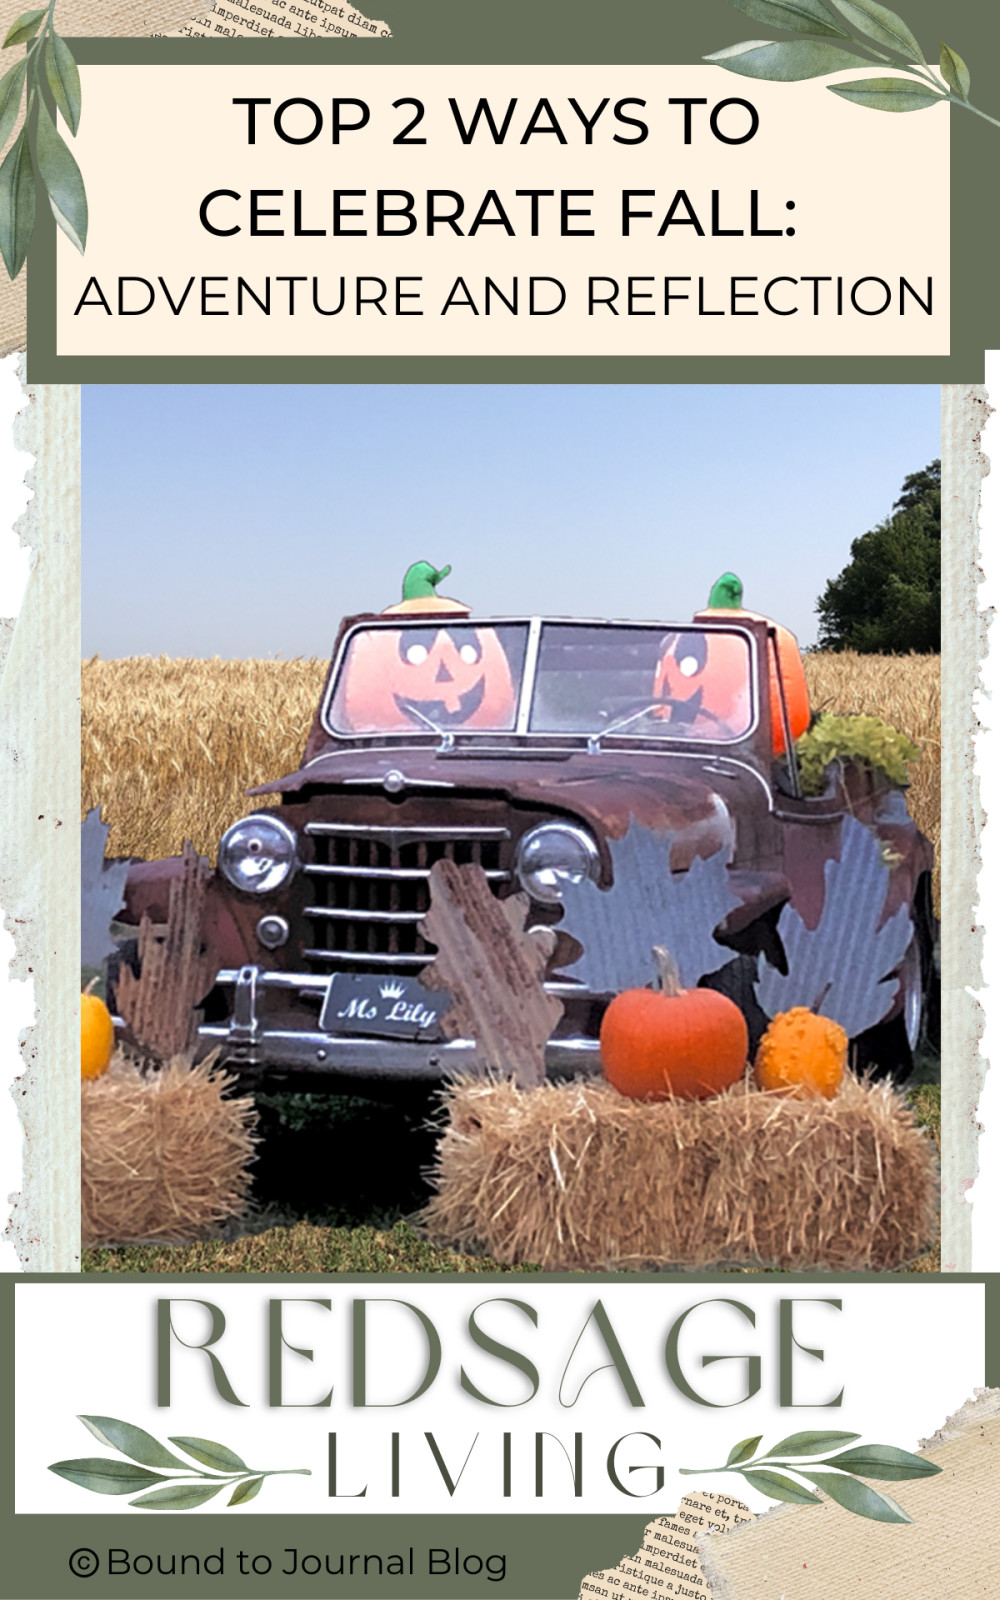 Top 2 Ways to Celebrate Fall: Adventure and Reflection